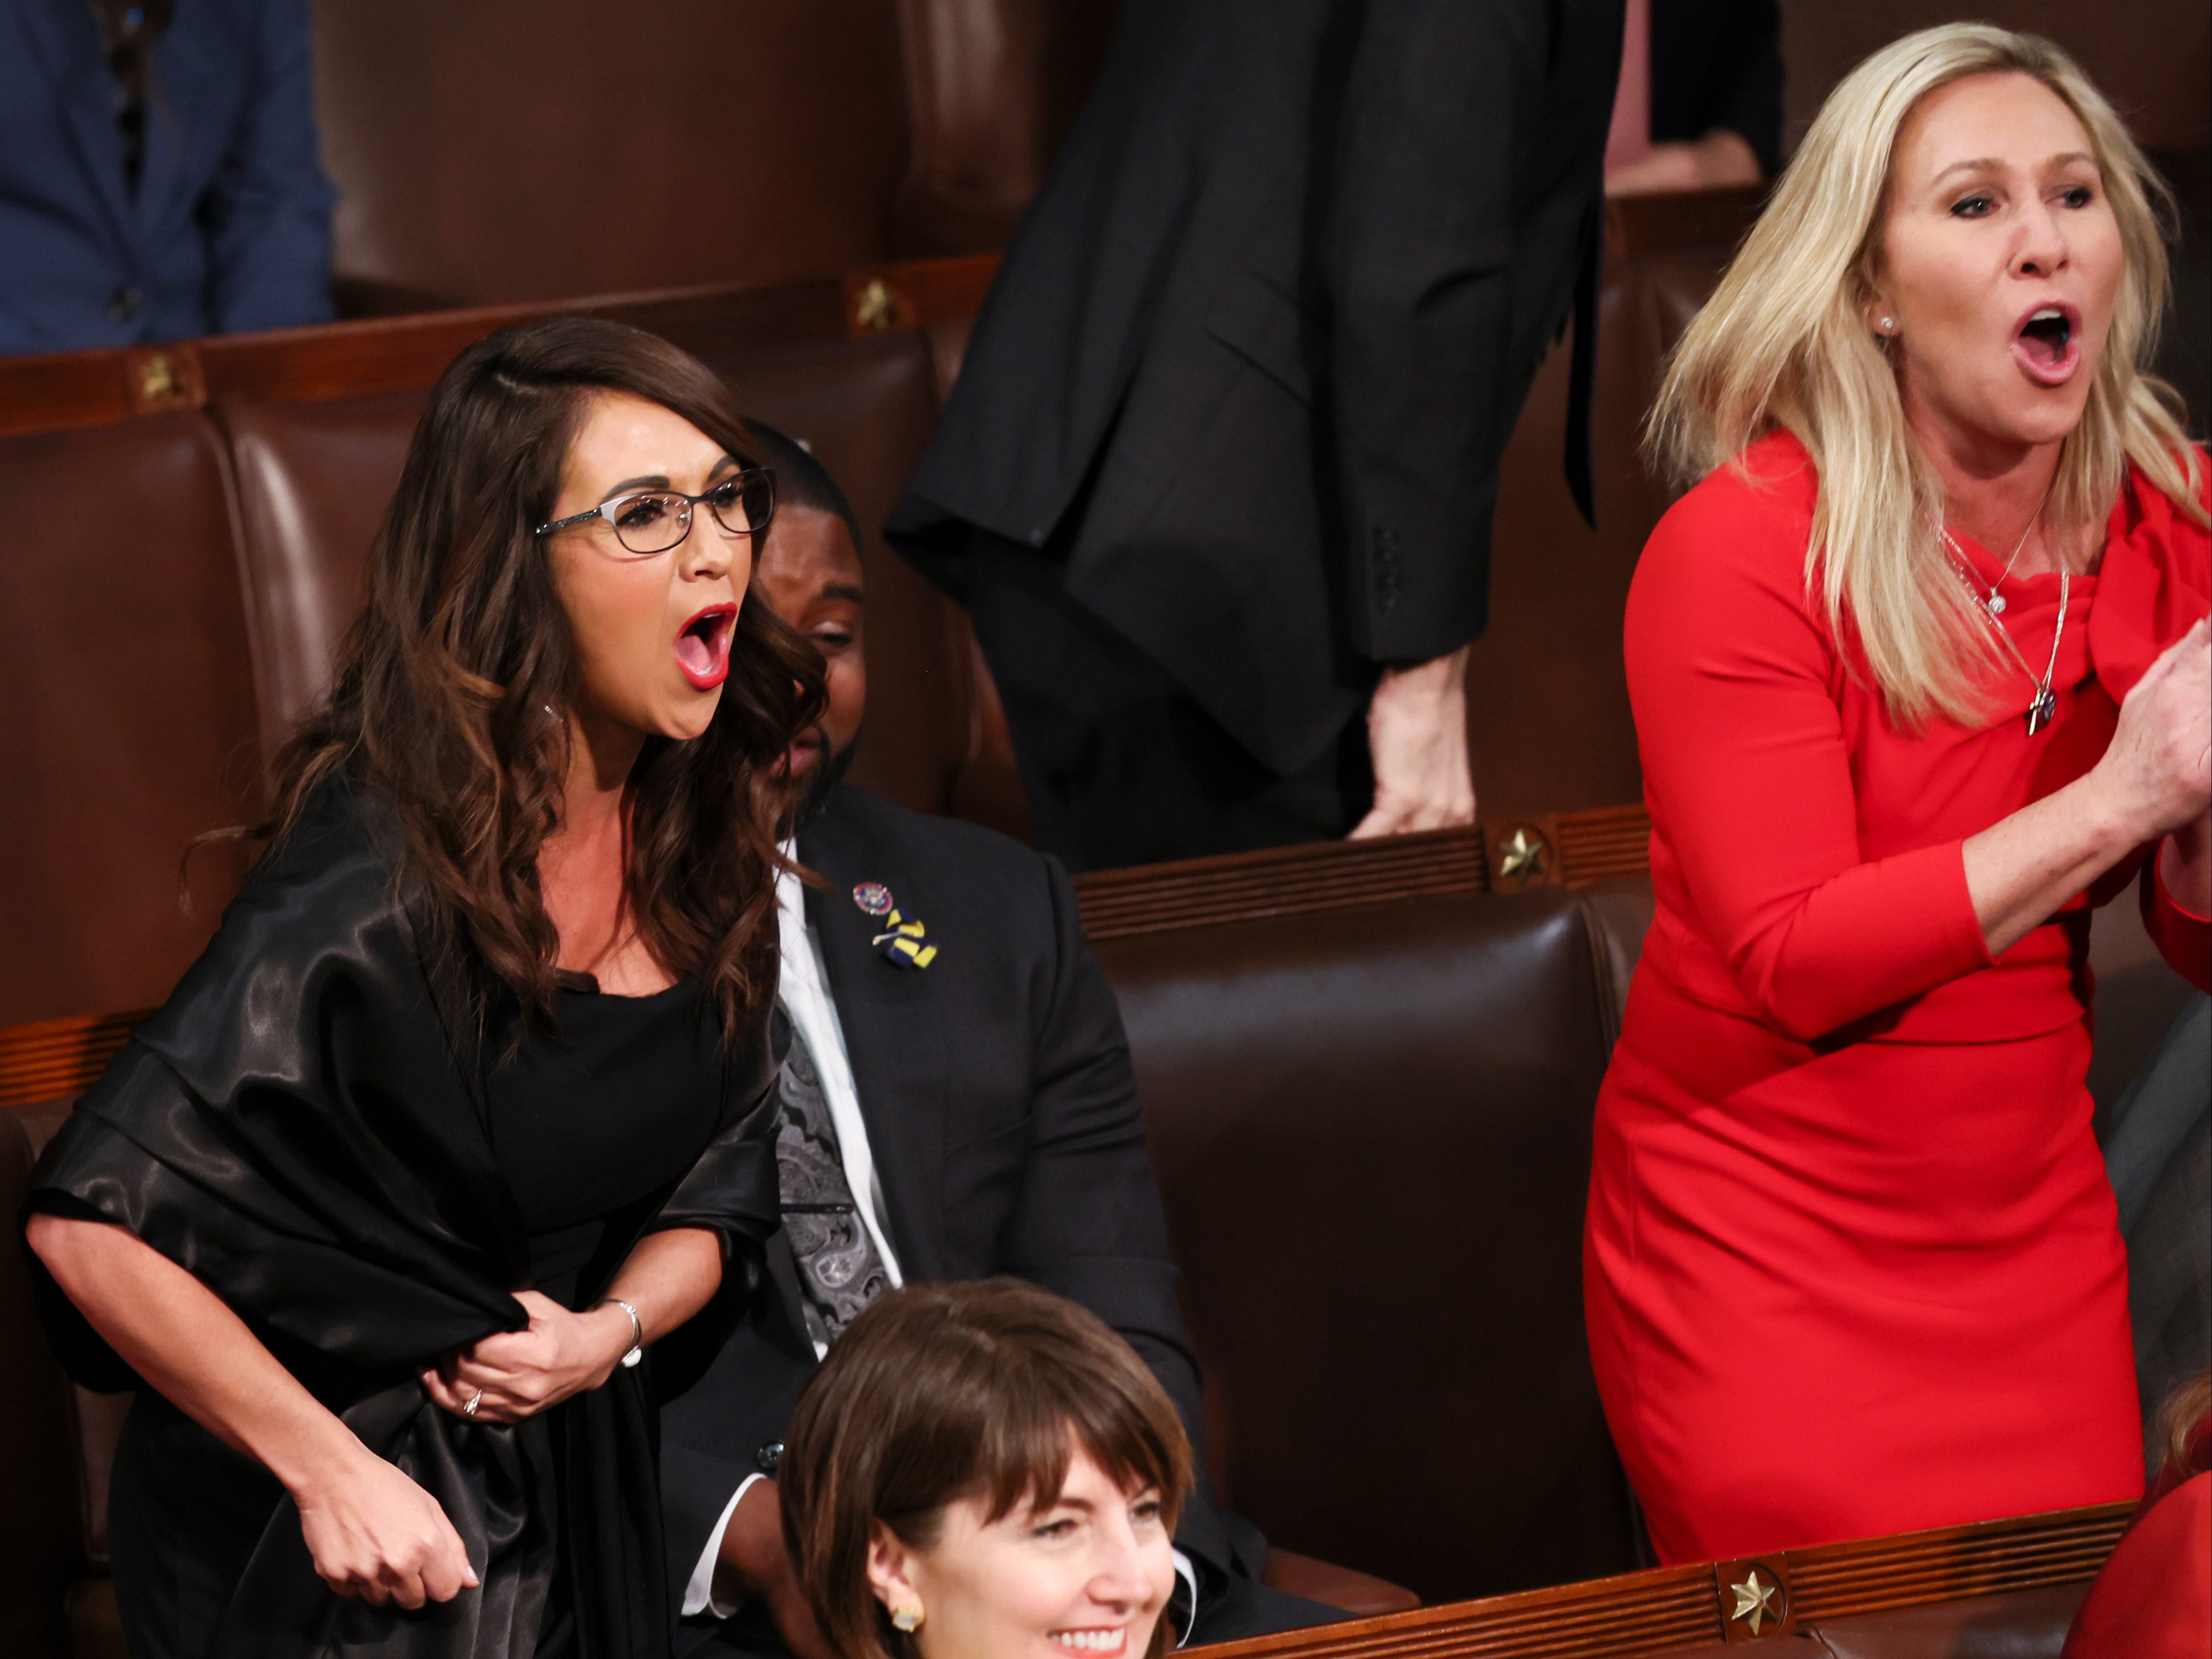 U.S. Rep. Lauren Boebert (R-CO) and Rep. Marjorie Taylor Greene (R-GA) scream "Build the Wall" as U.S. President Joe Biden delivers the State of the Union address during a joint session of Congress